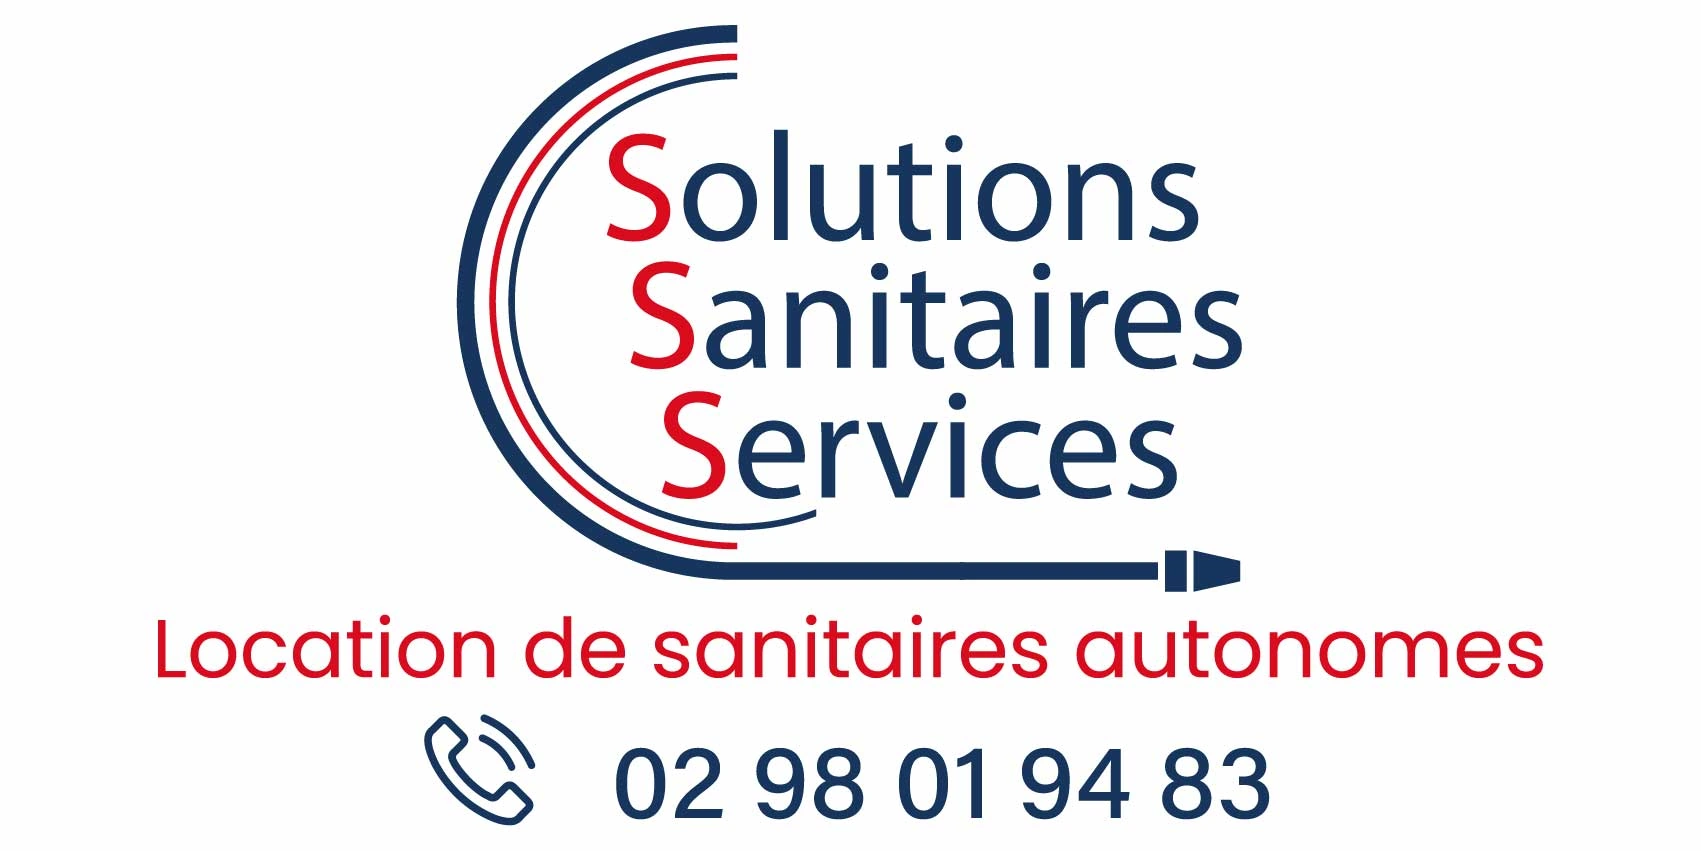 Solutions Sanitaires Services